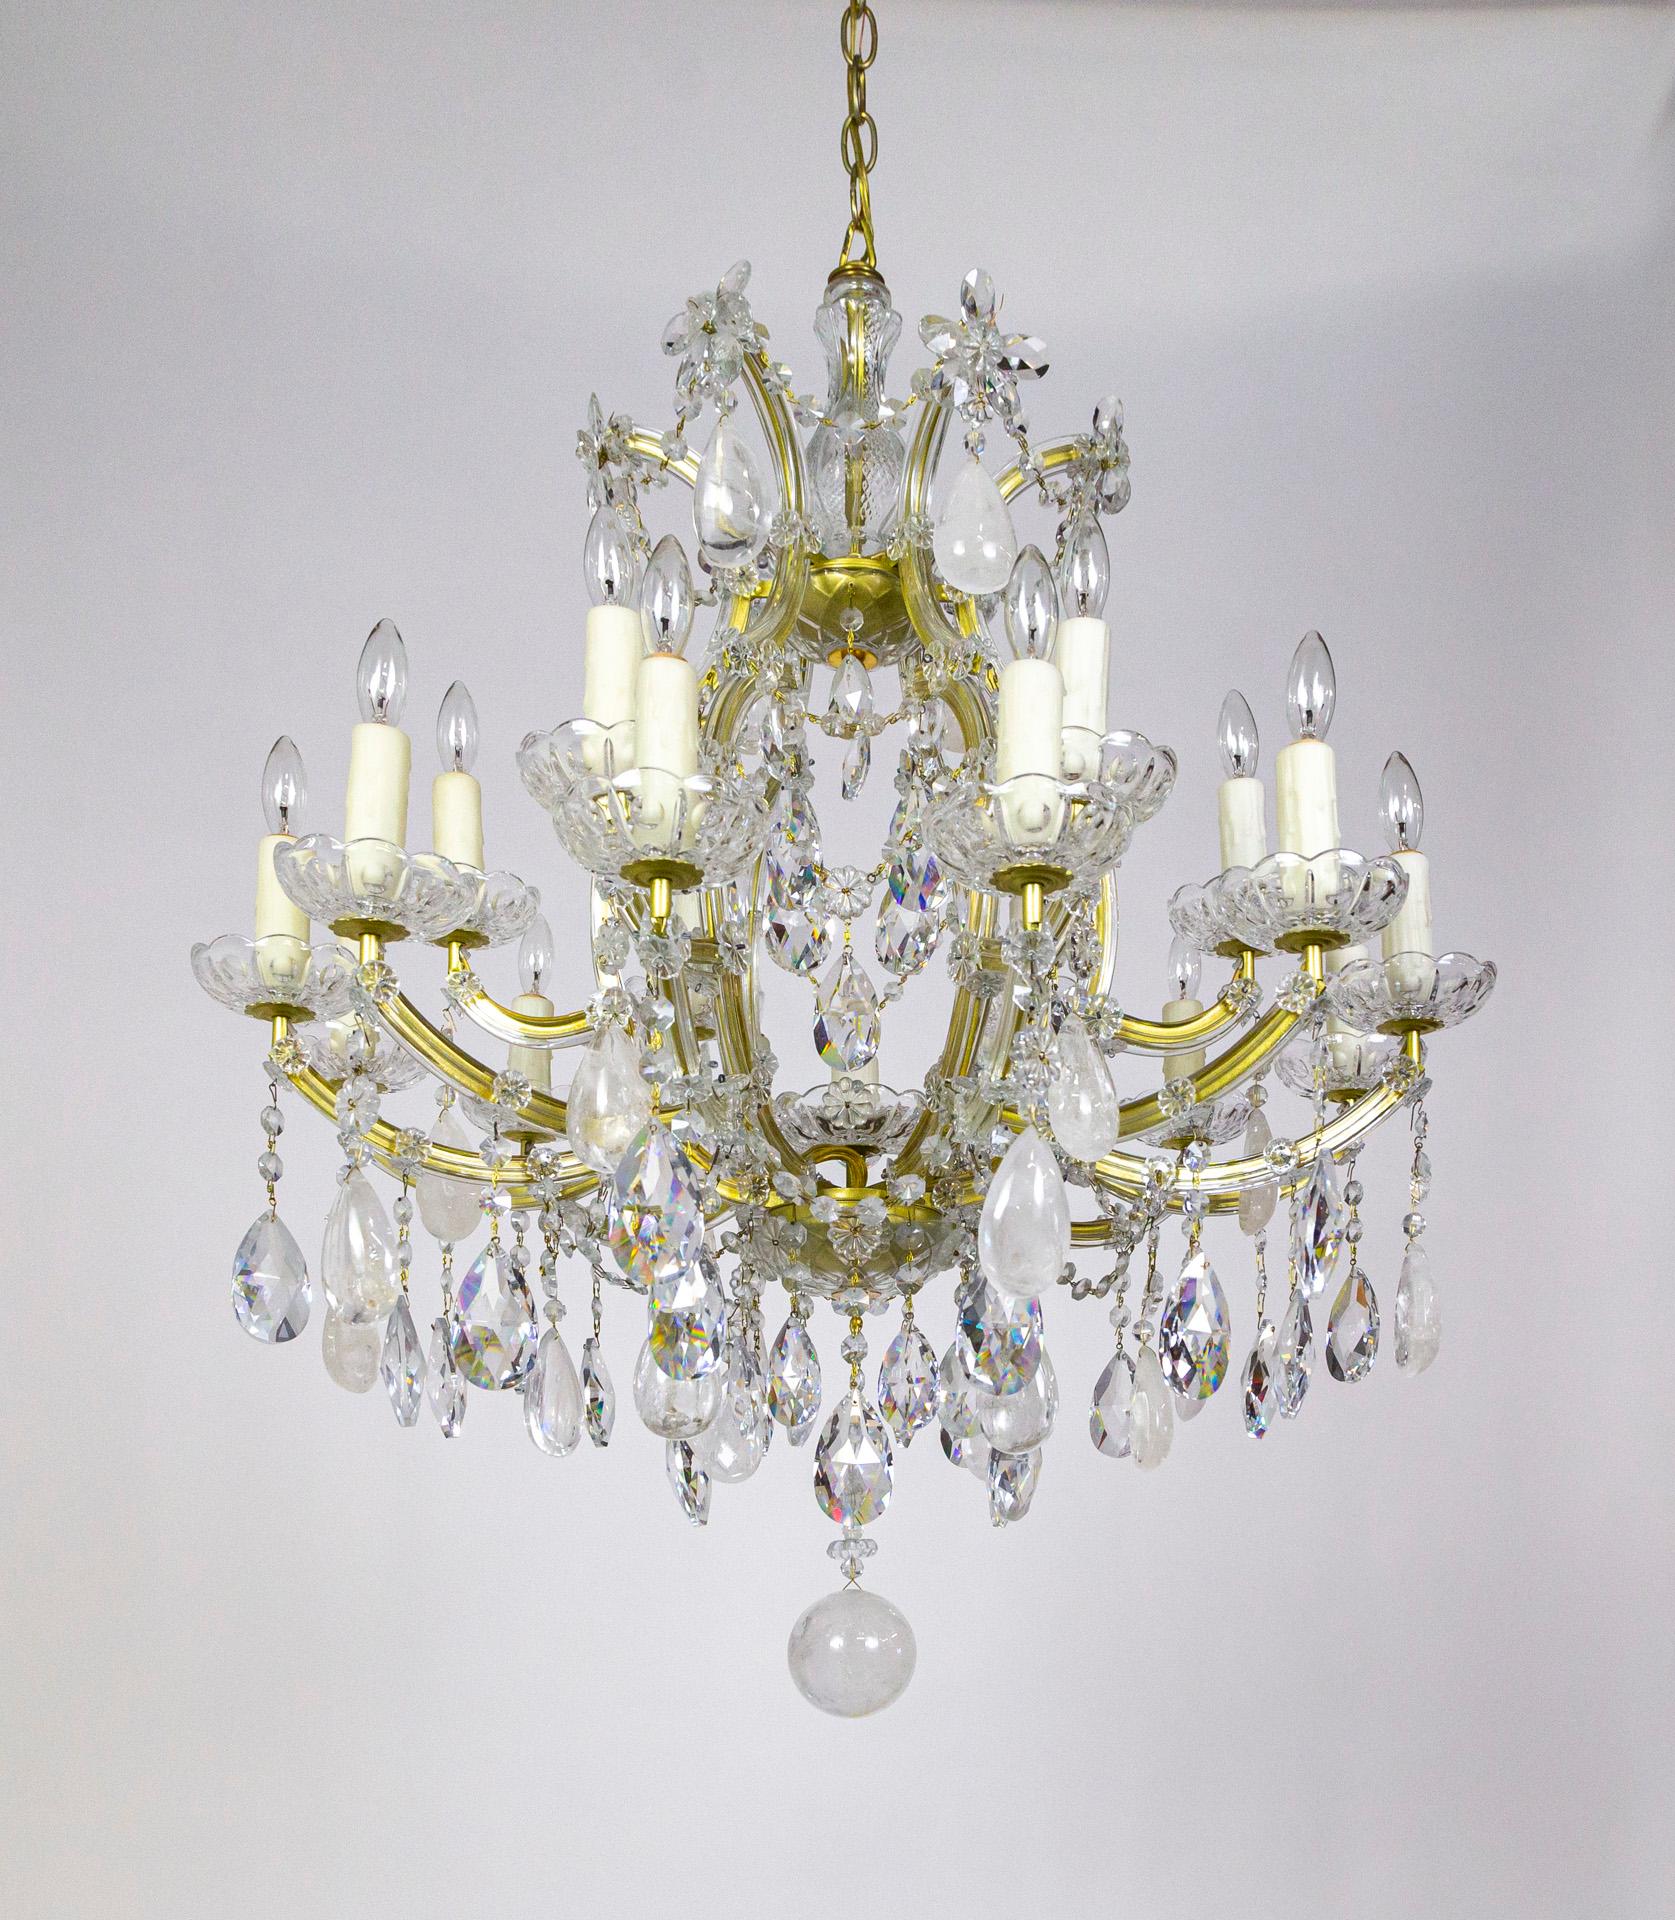 19-Light Rock Crystal Maria Theresa Chandelier For Sale 7